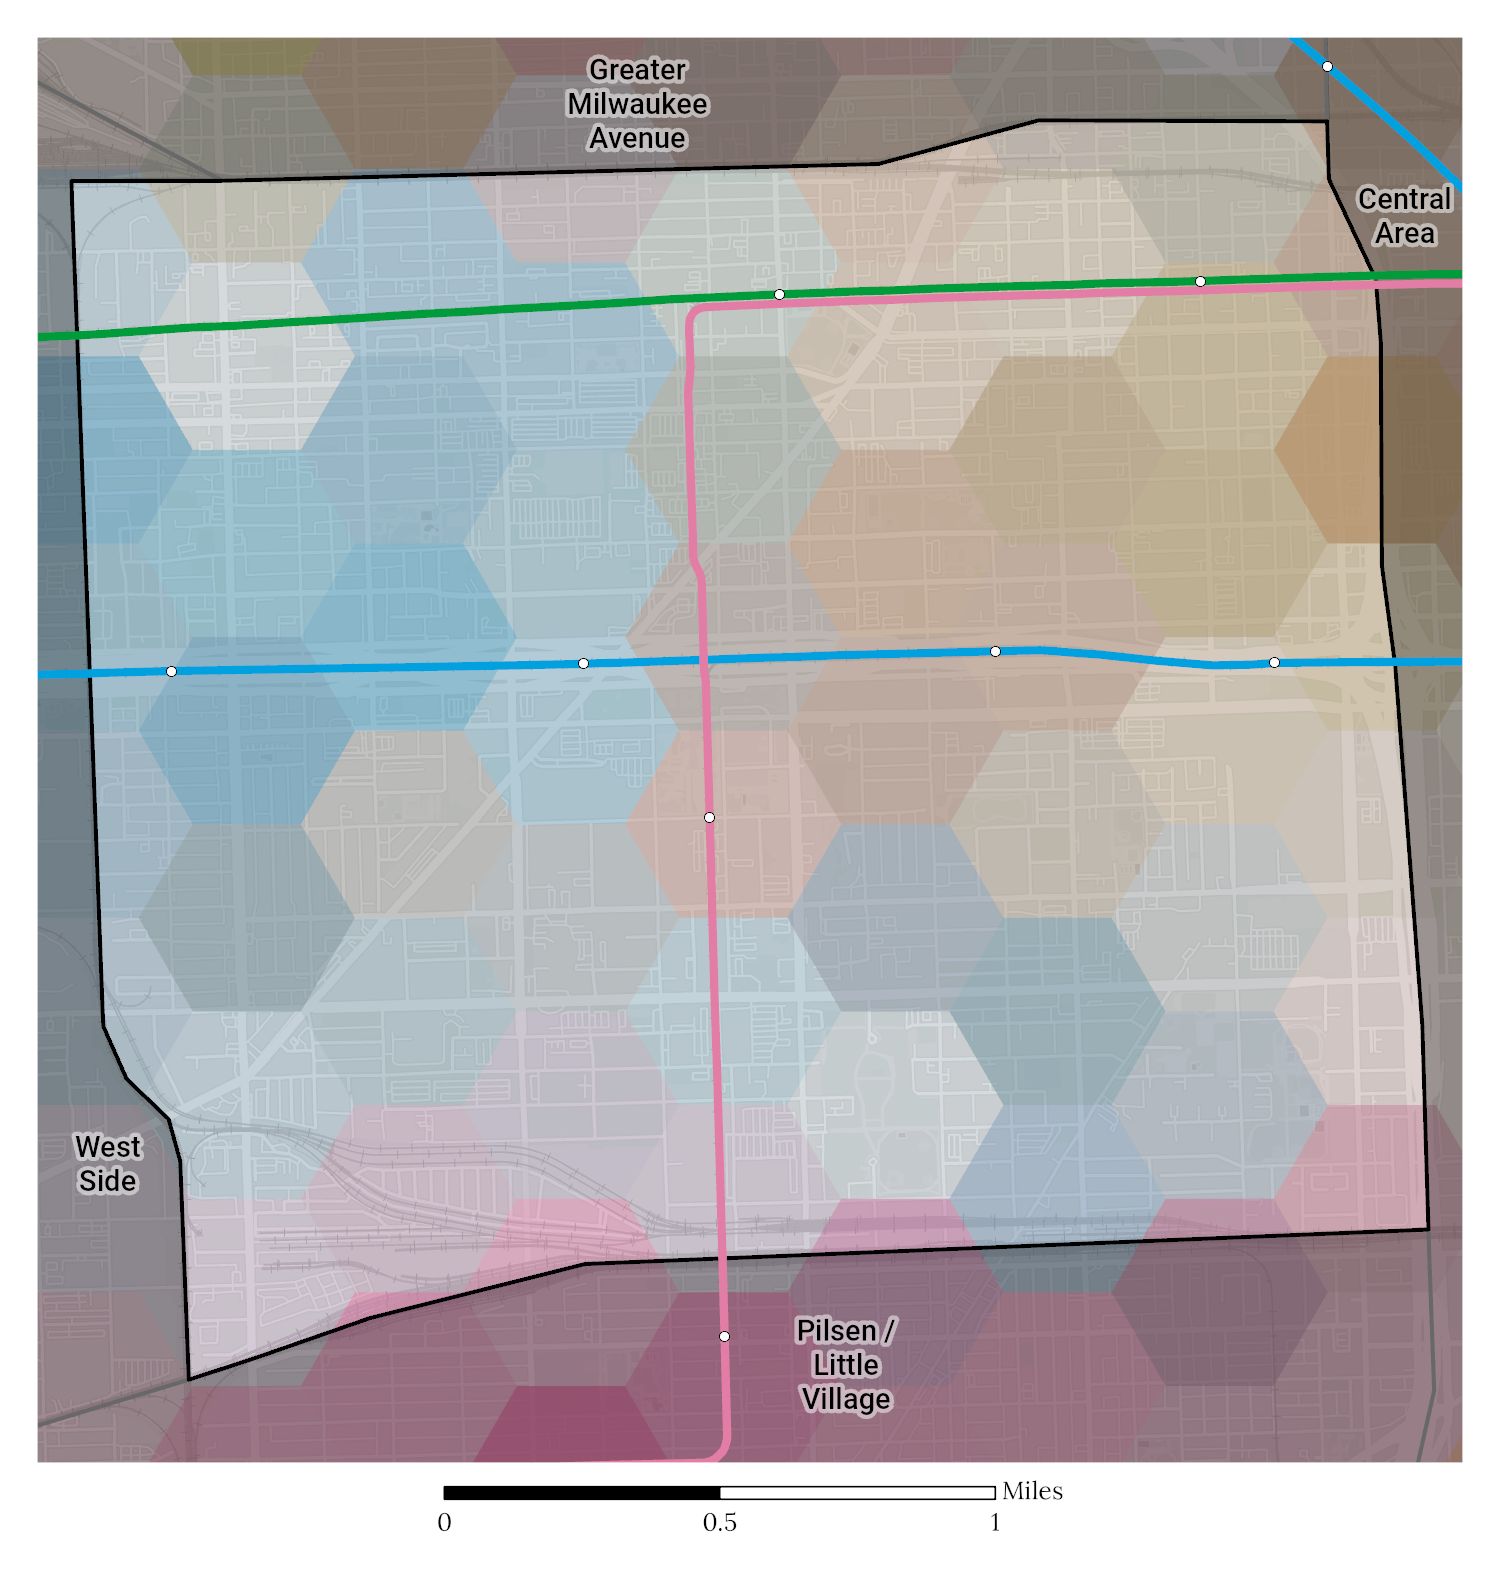 Racial and Ethnic composition map of Near West Side